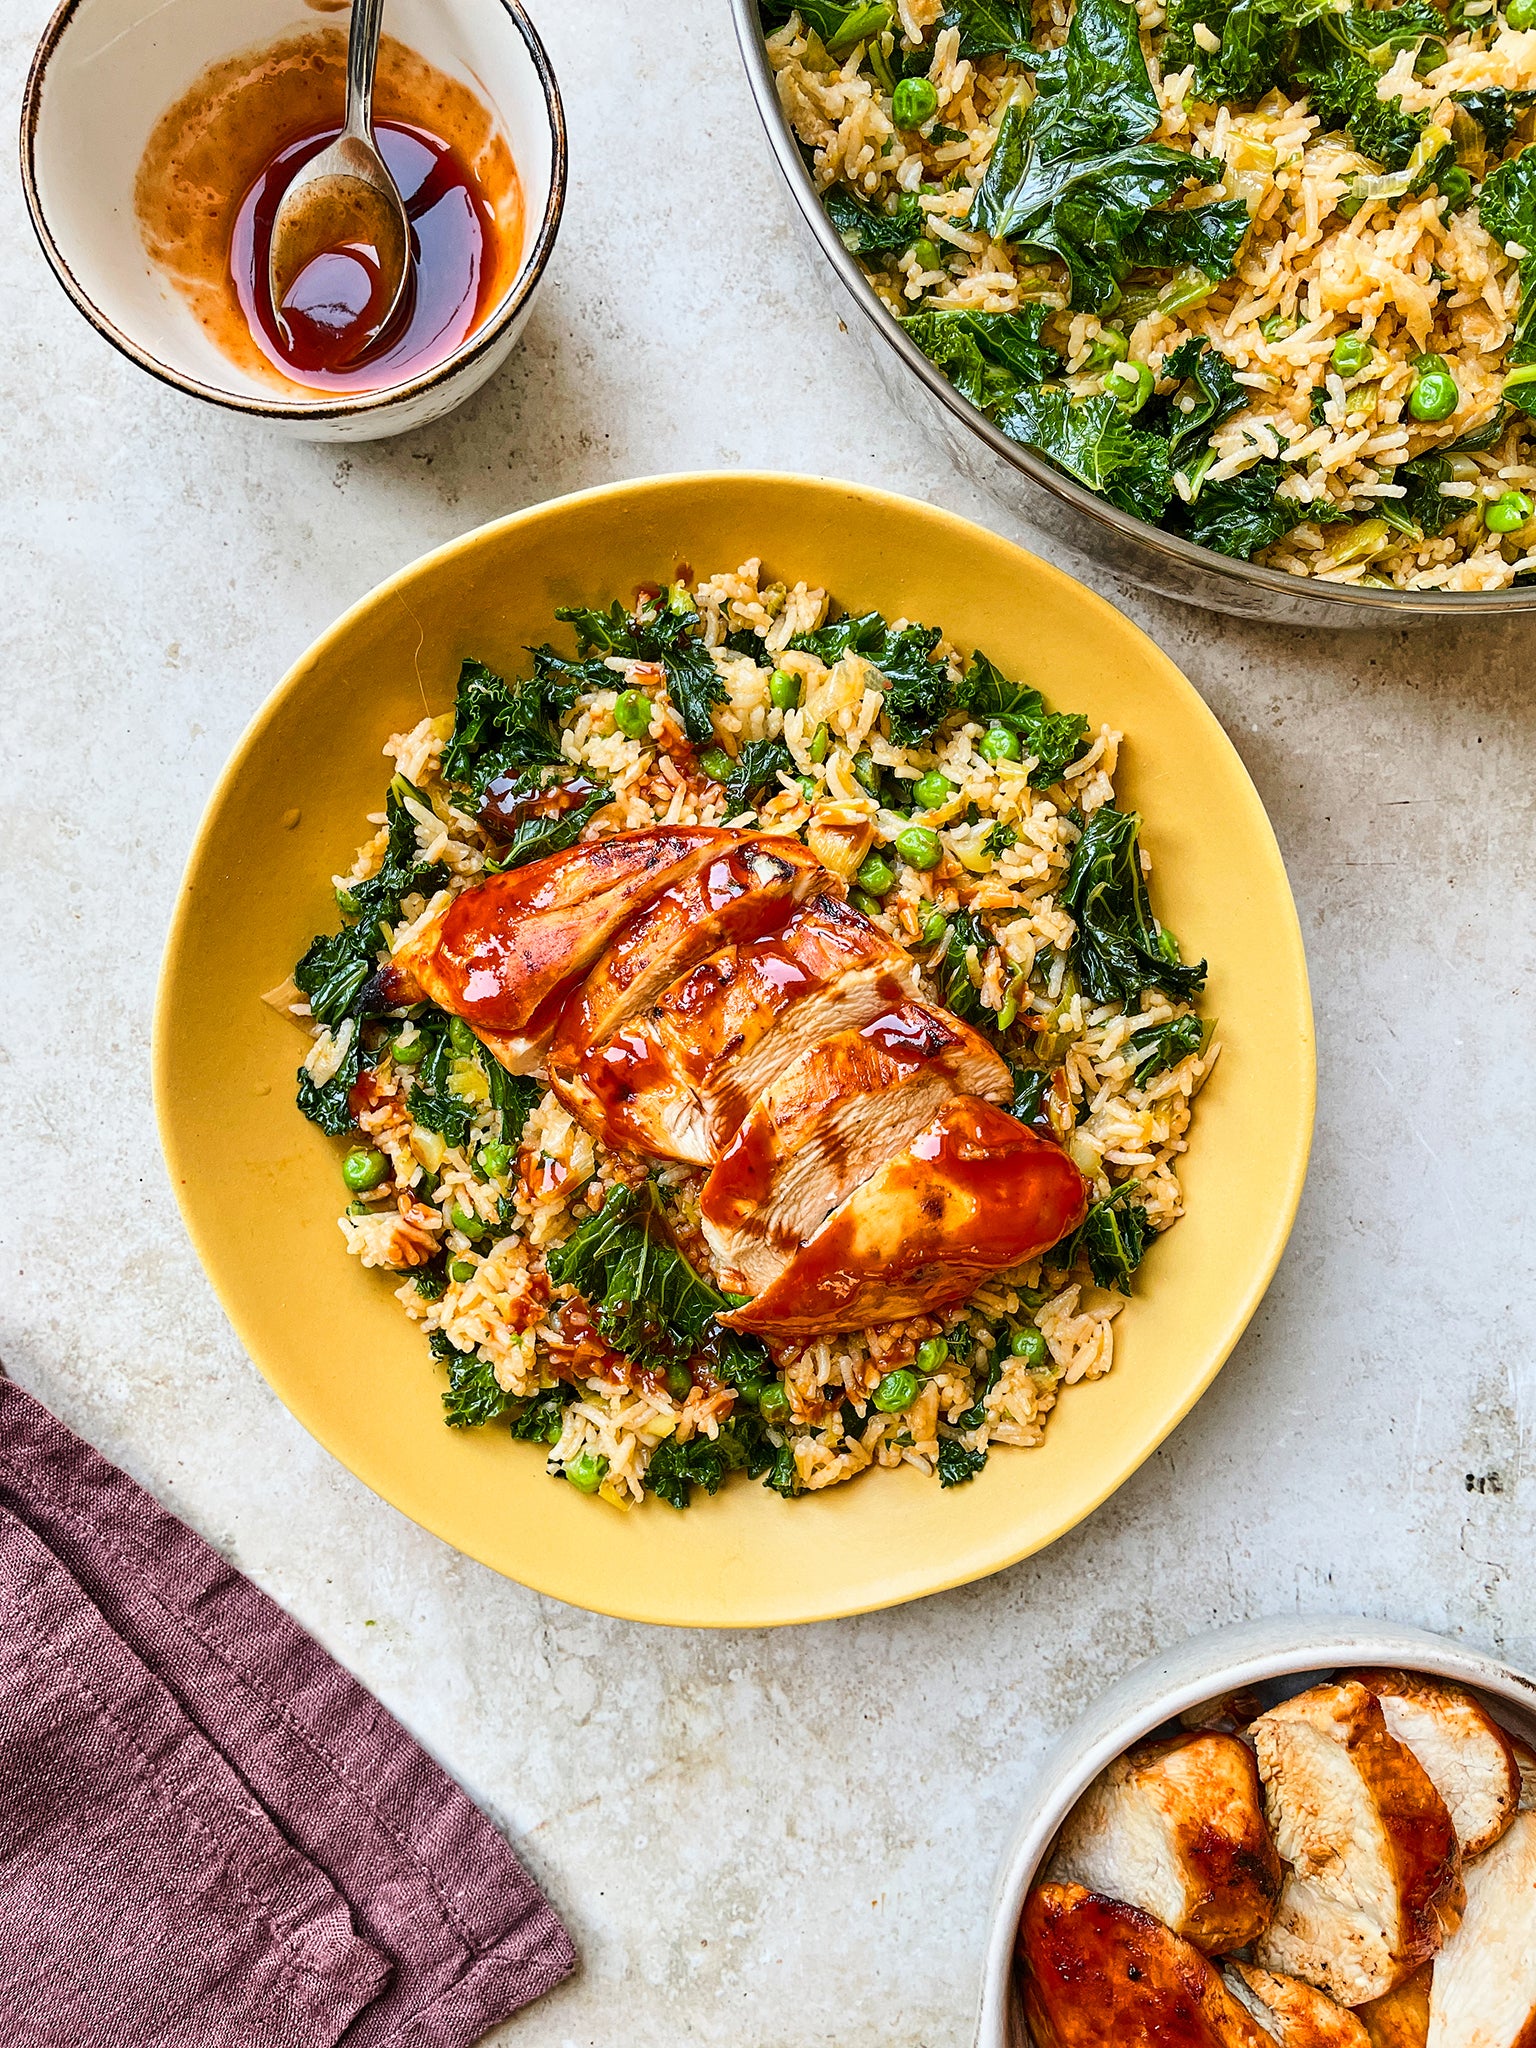 Sticky chicken, kale and rice make a delicious and nutritious takeout alternative.